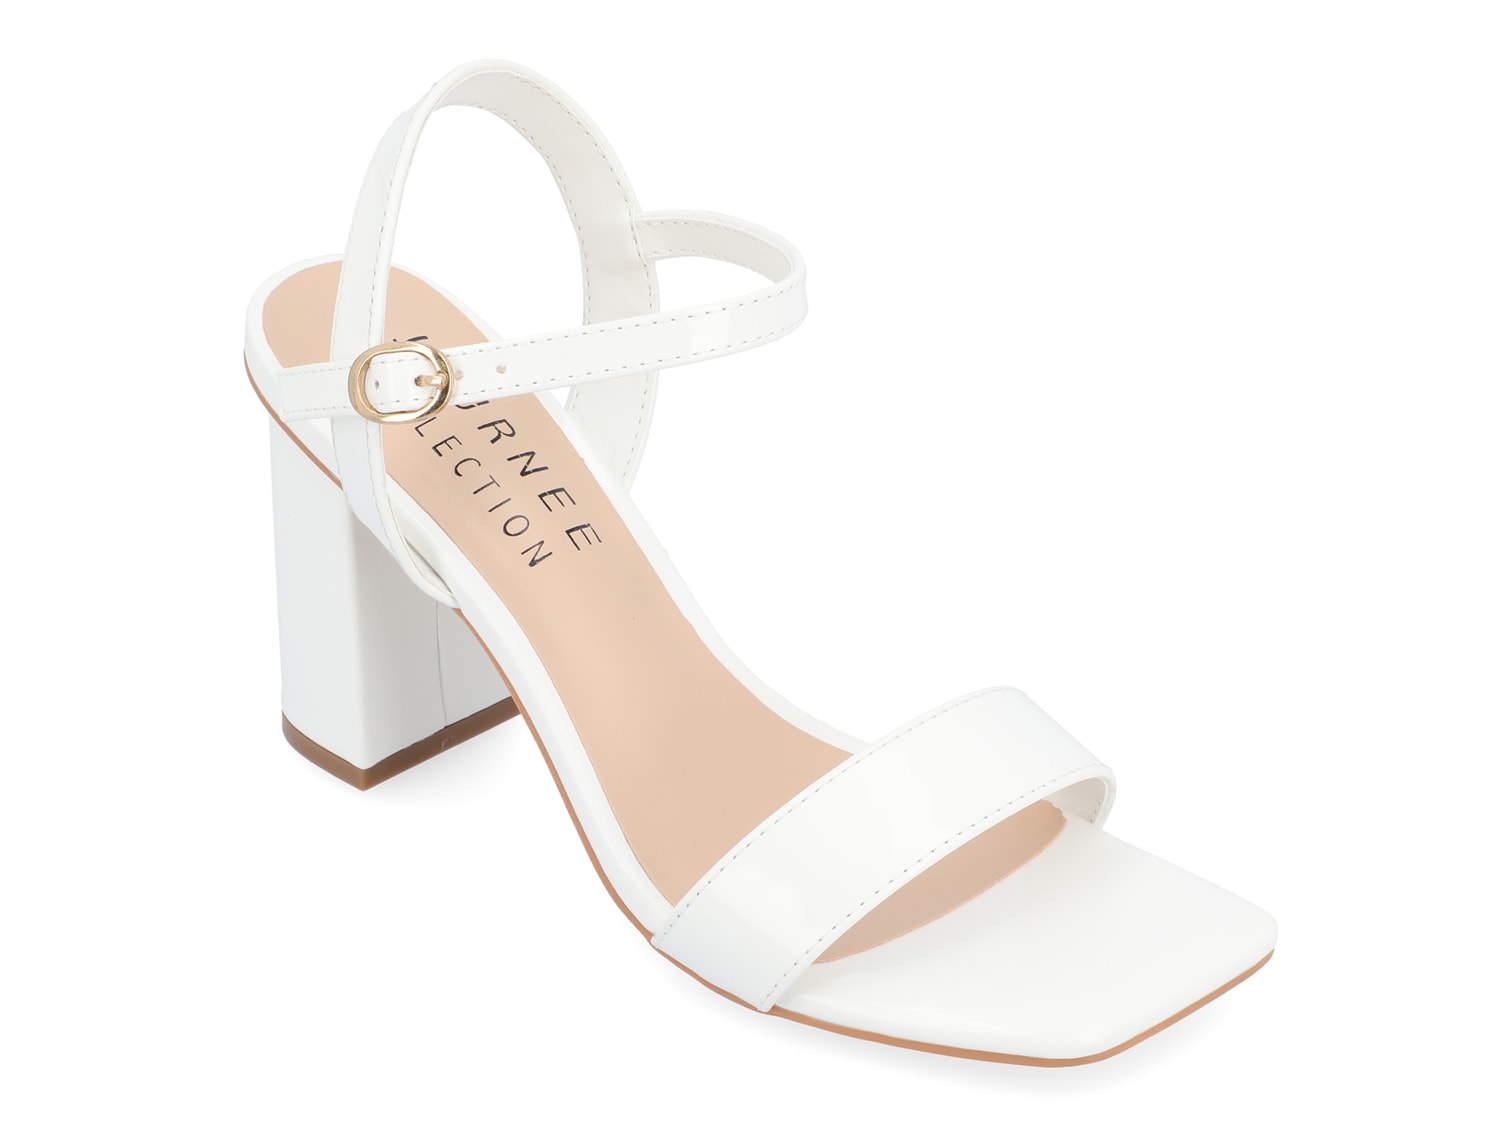 Journee Collection Tivona Sandal - Free Shipping | DSW